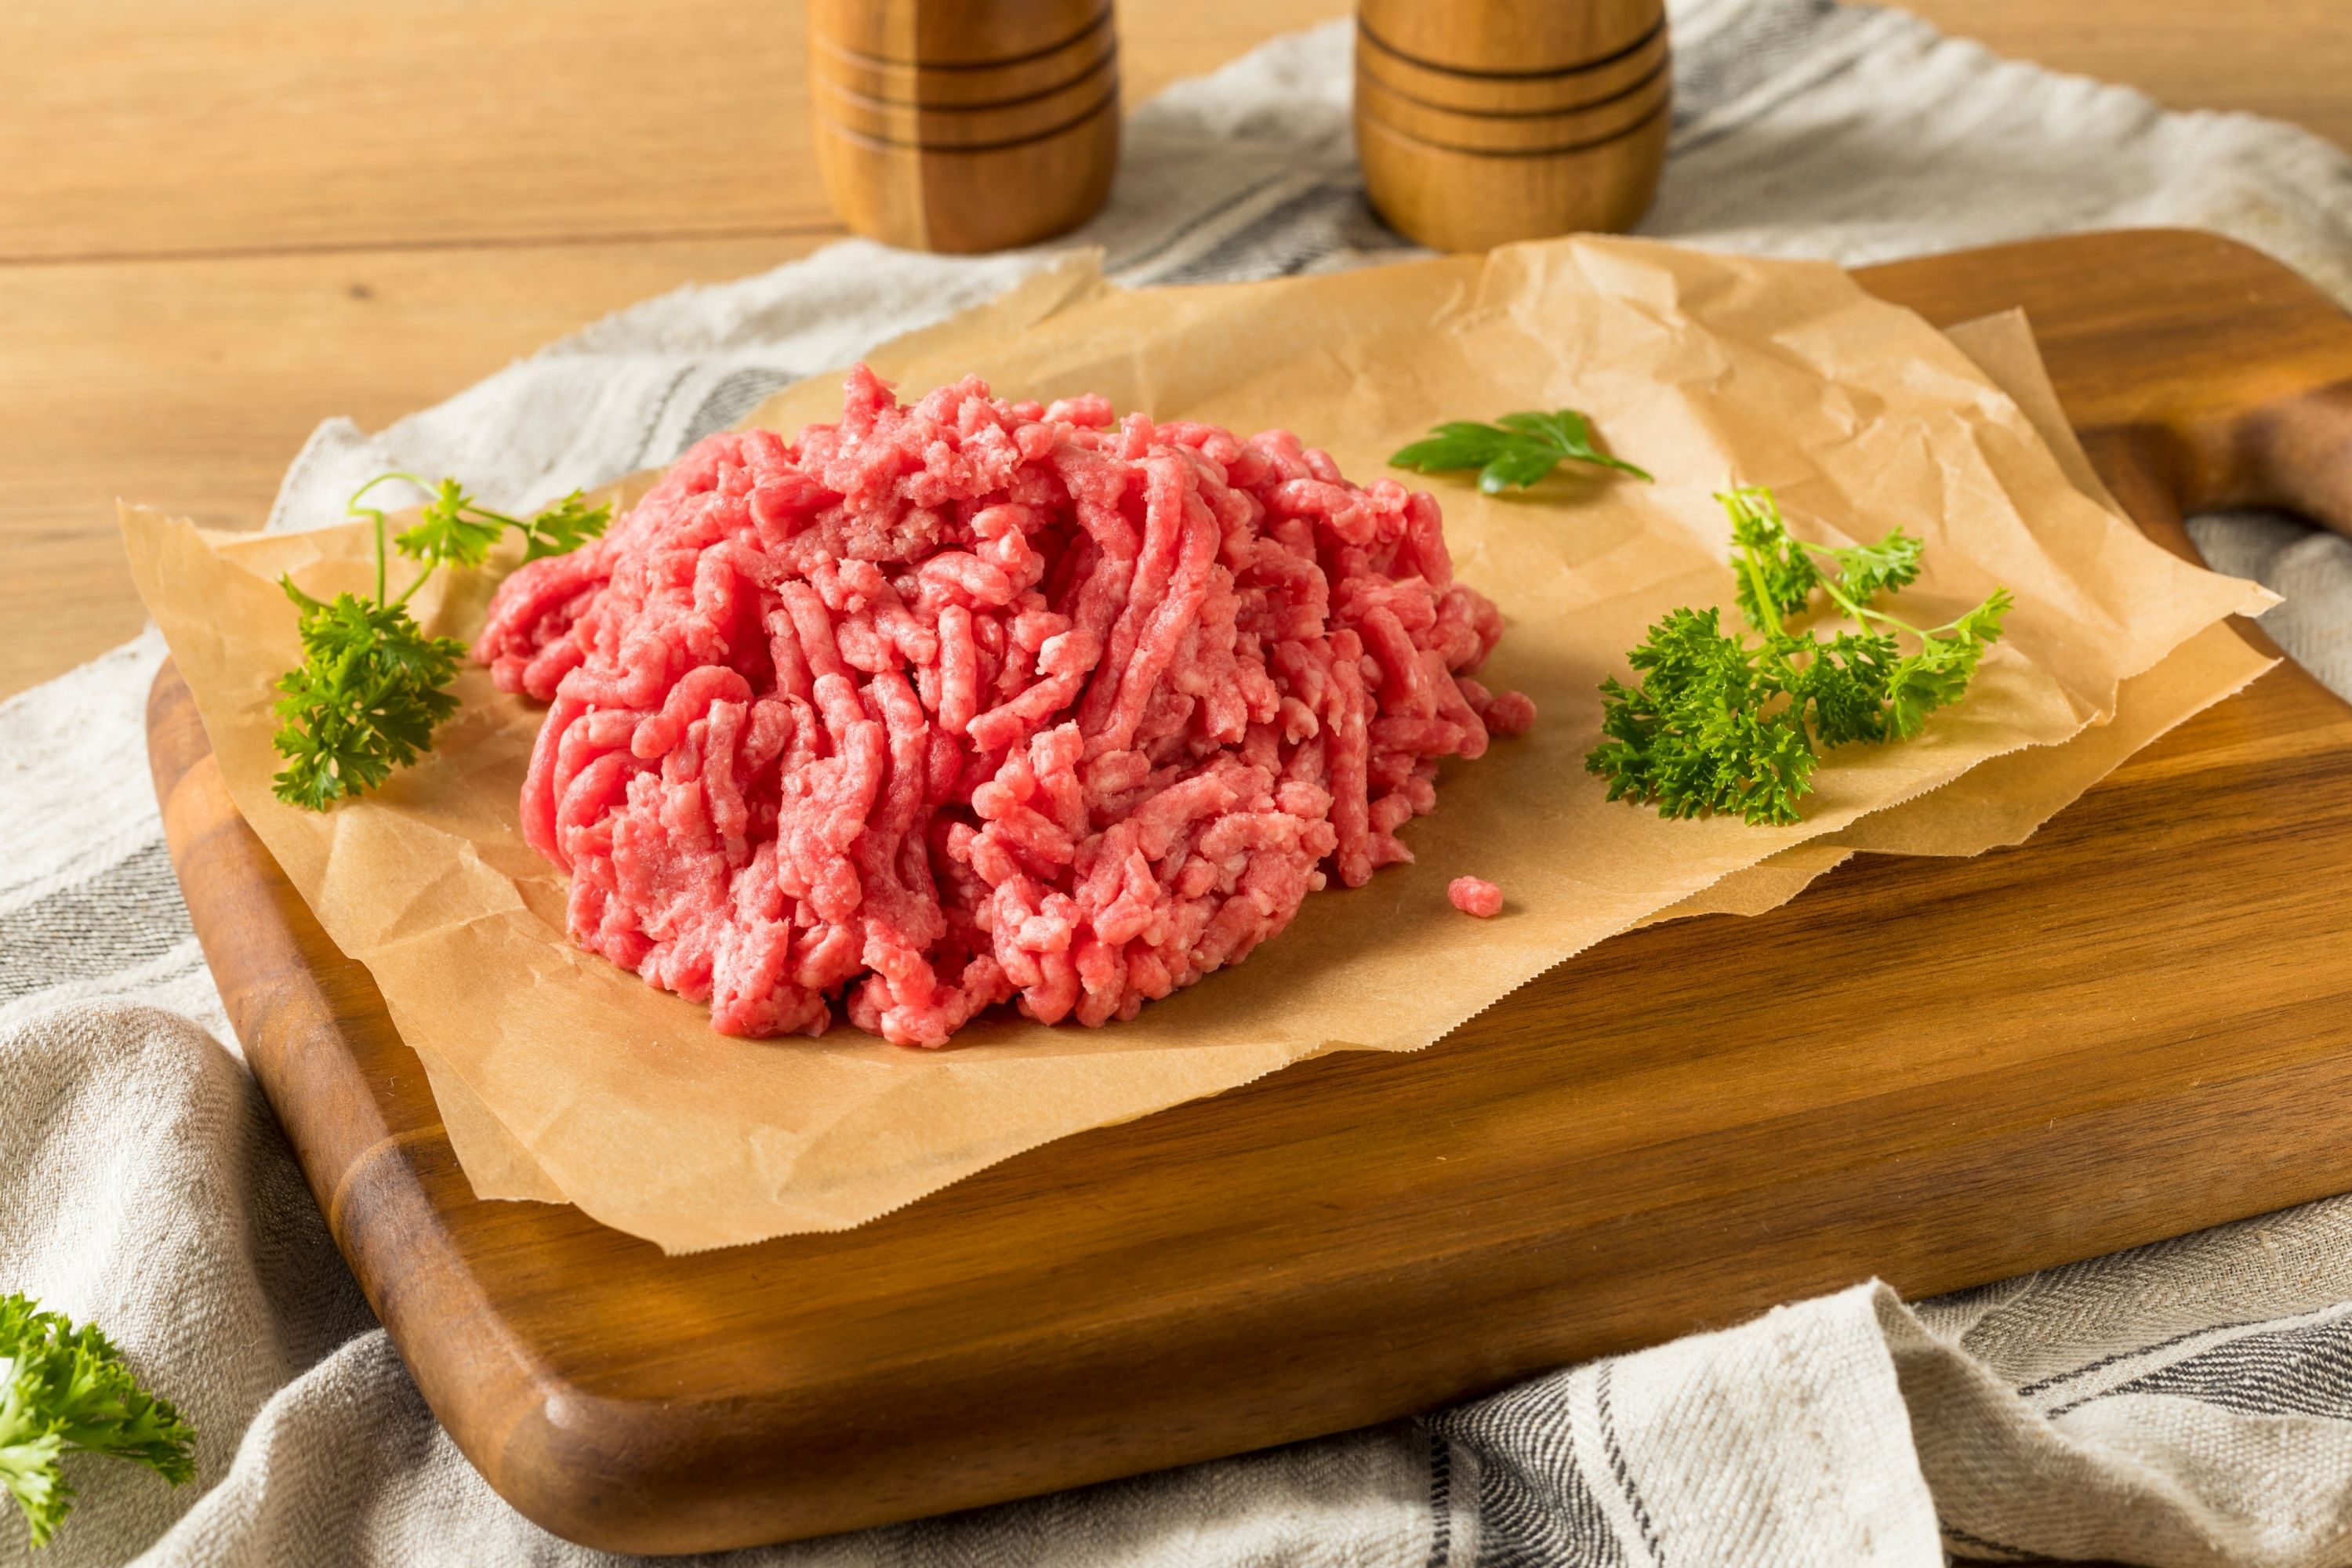 How to Store Ground Beef If You Bought Too Much